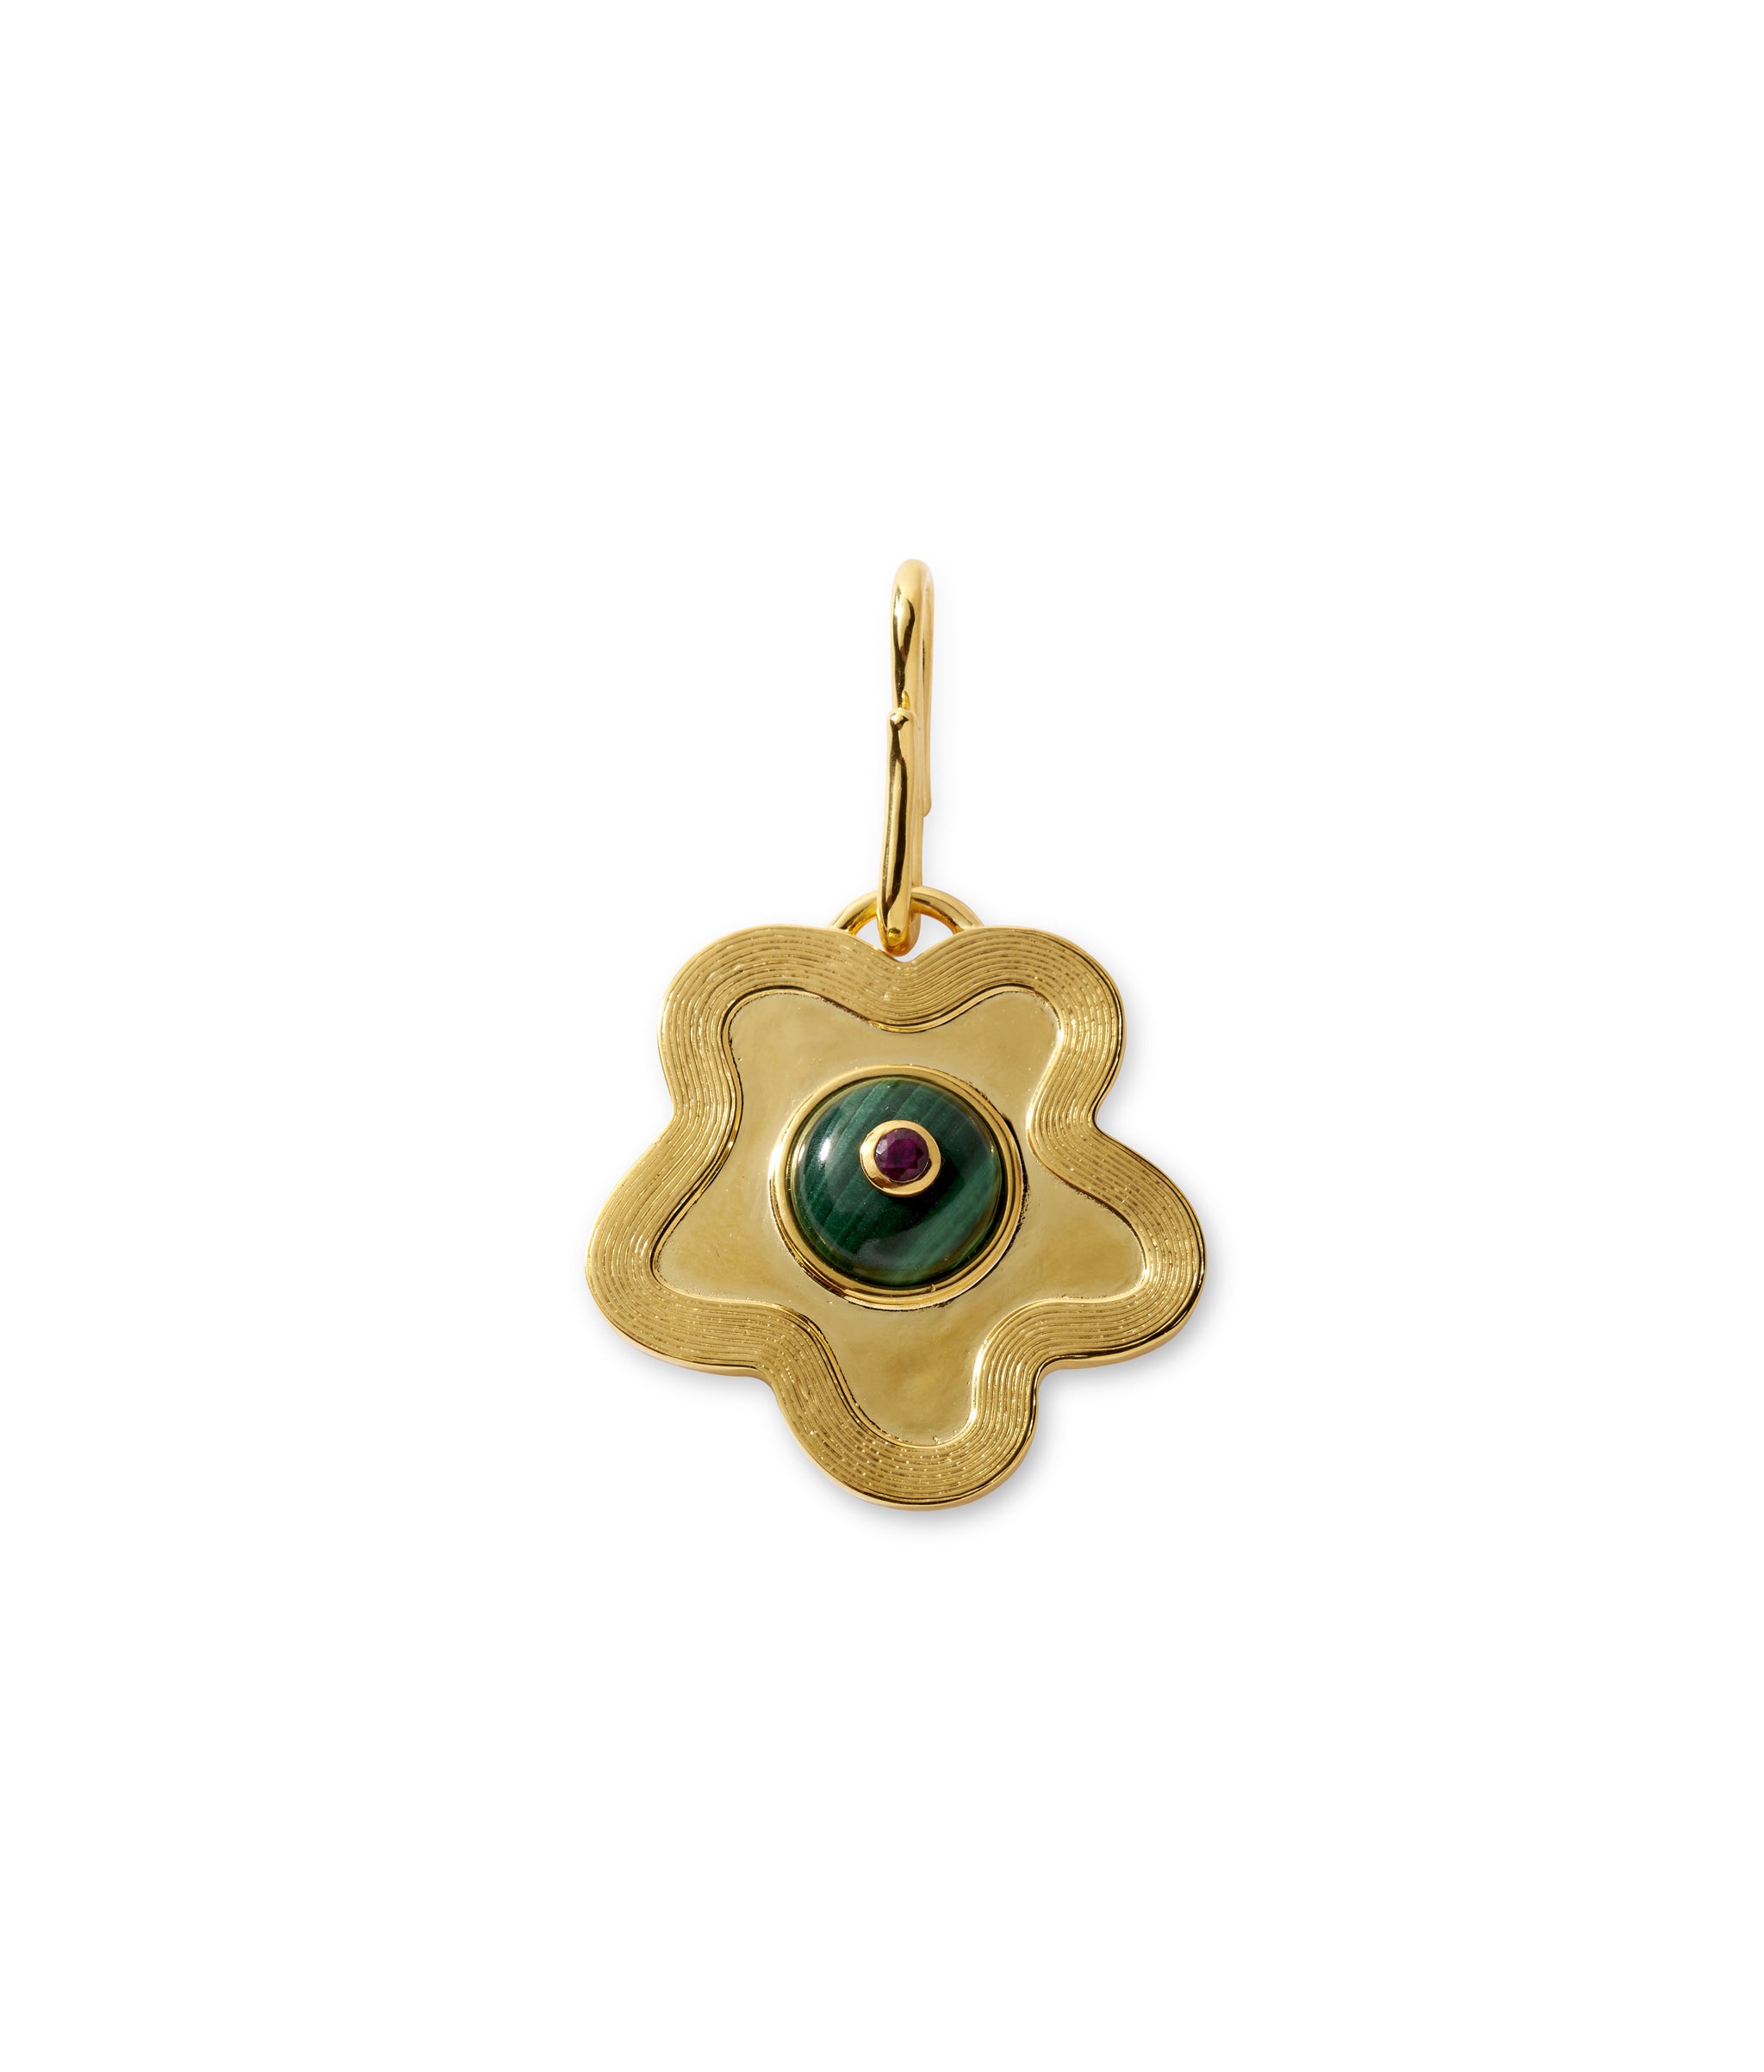 Nana Pendant in Shasta Daisy. Gold-plated etched daisy with malachite cabochon, inlaid with pink rhodolite.